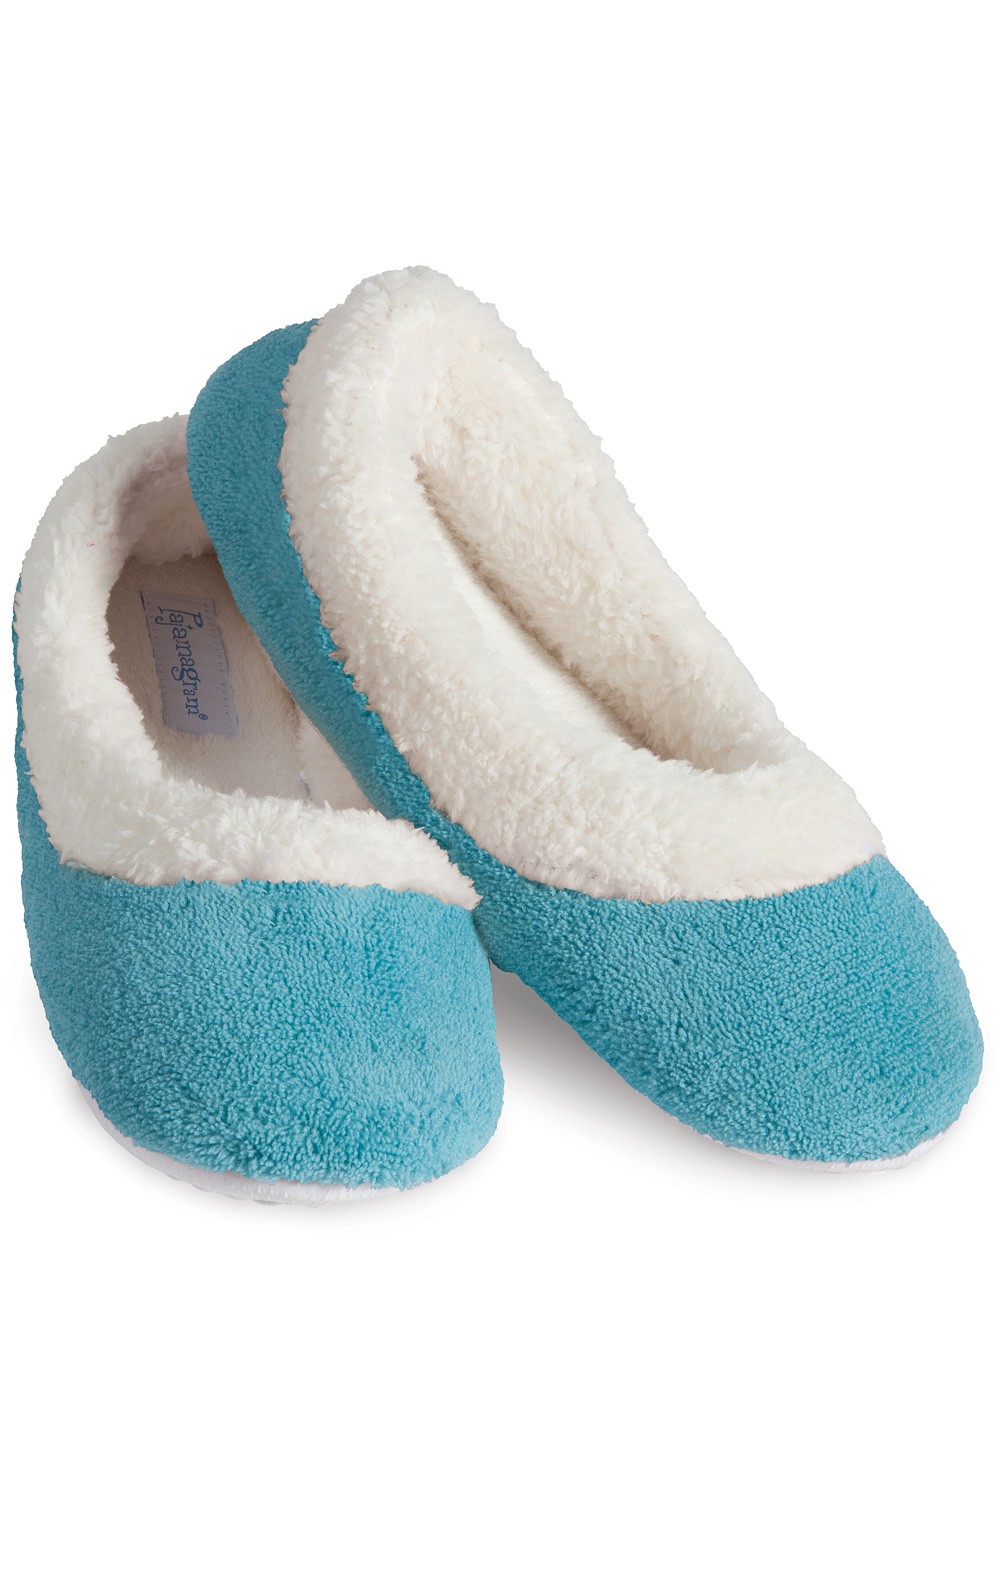 teal slippers